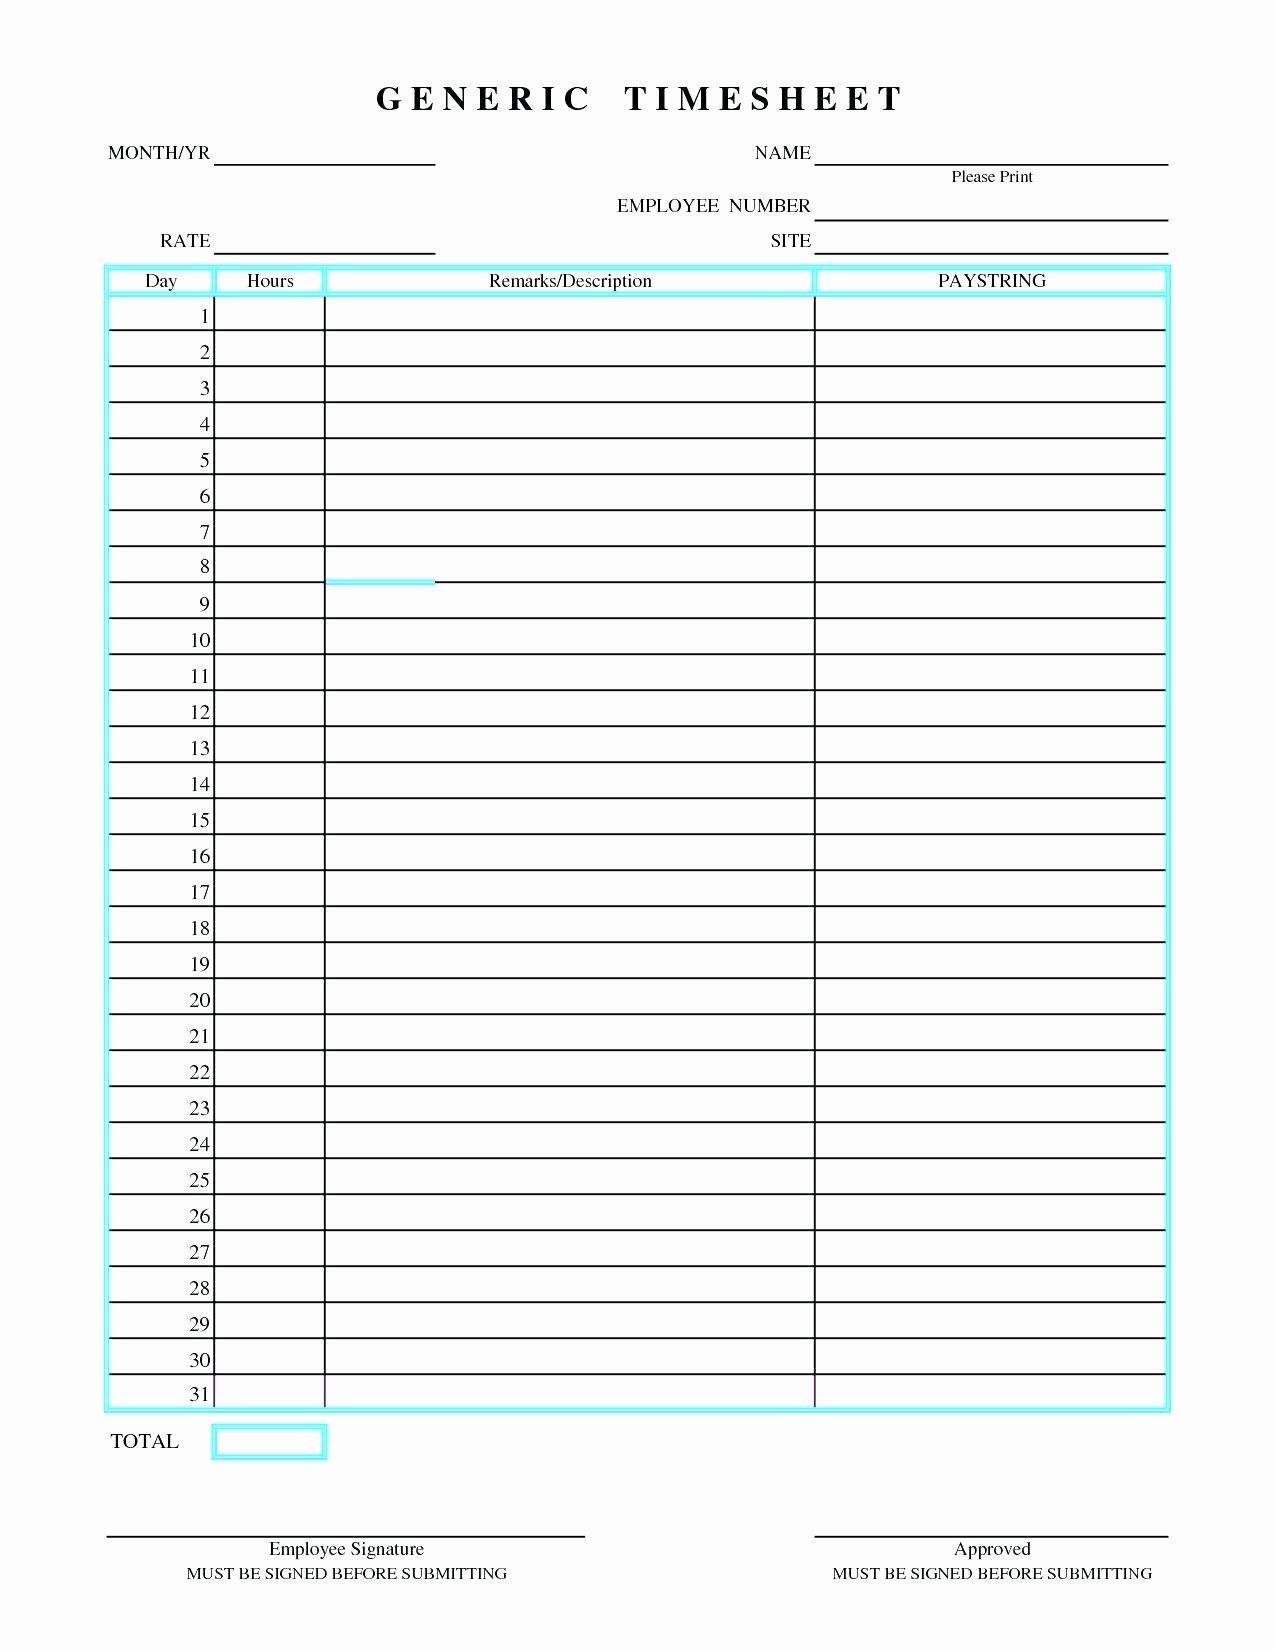 Daily Production Report Template Excel Awesome Daily Production Report Template